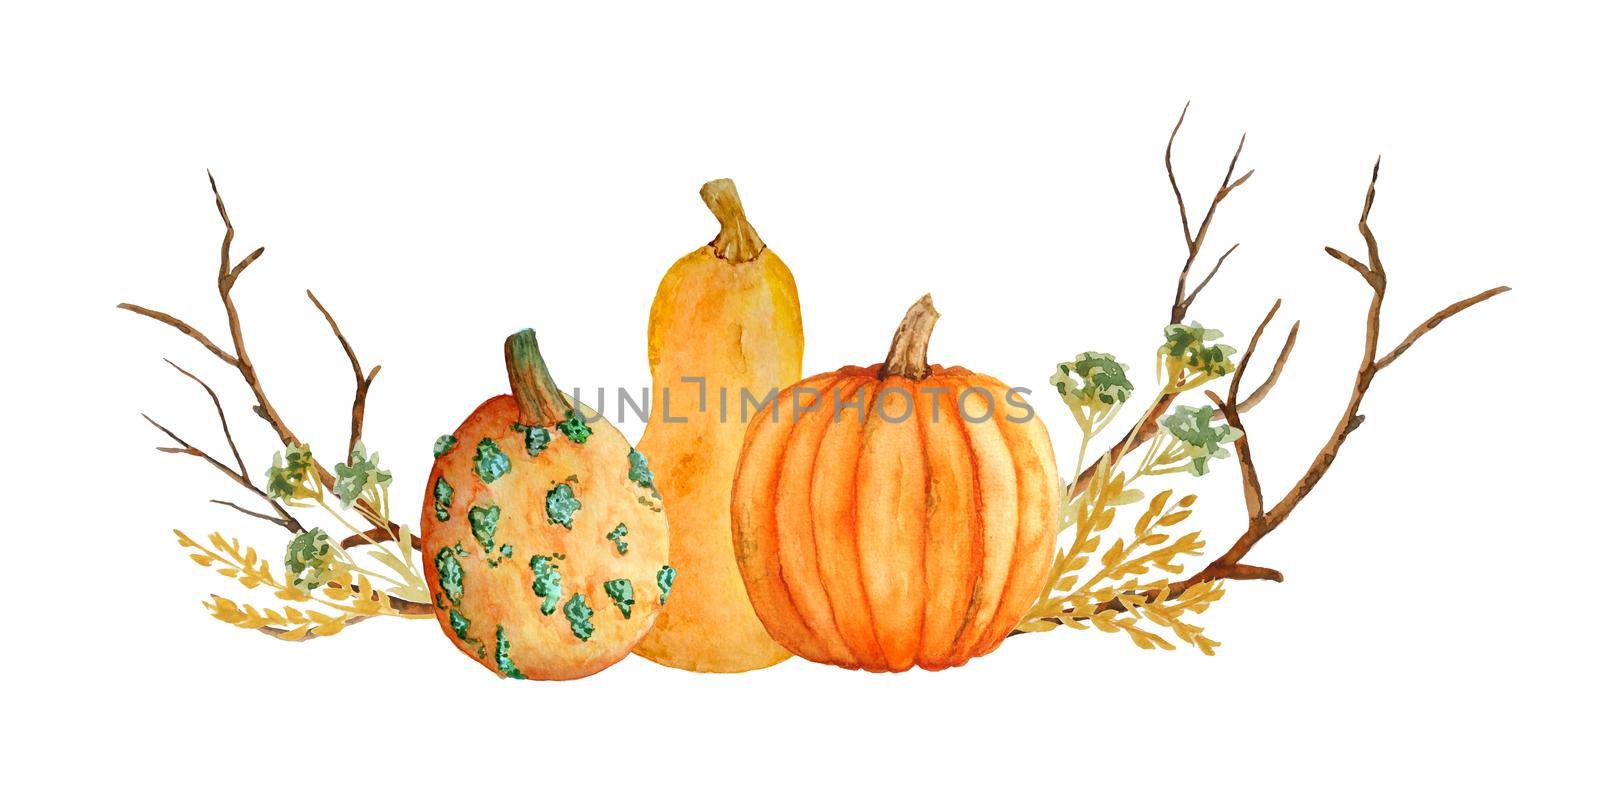 Watercolor hand drawn composition illustration of orange yellow butternut pumpkins, wood forest leaves and brown branches. For Halloween thanksgiving design in soft minimalism elegant style, woodland nature